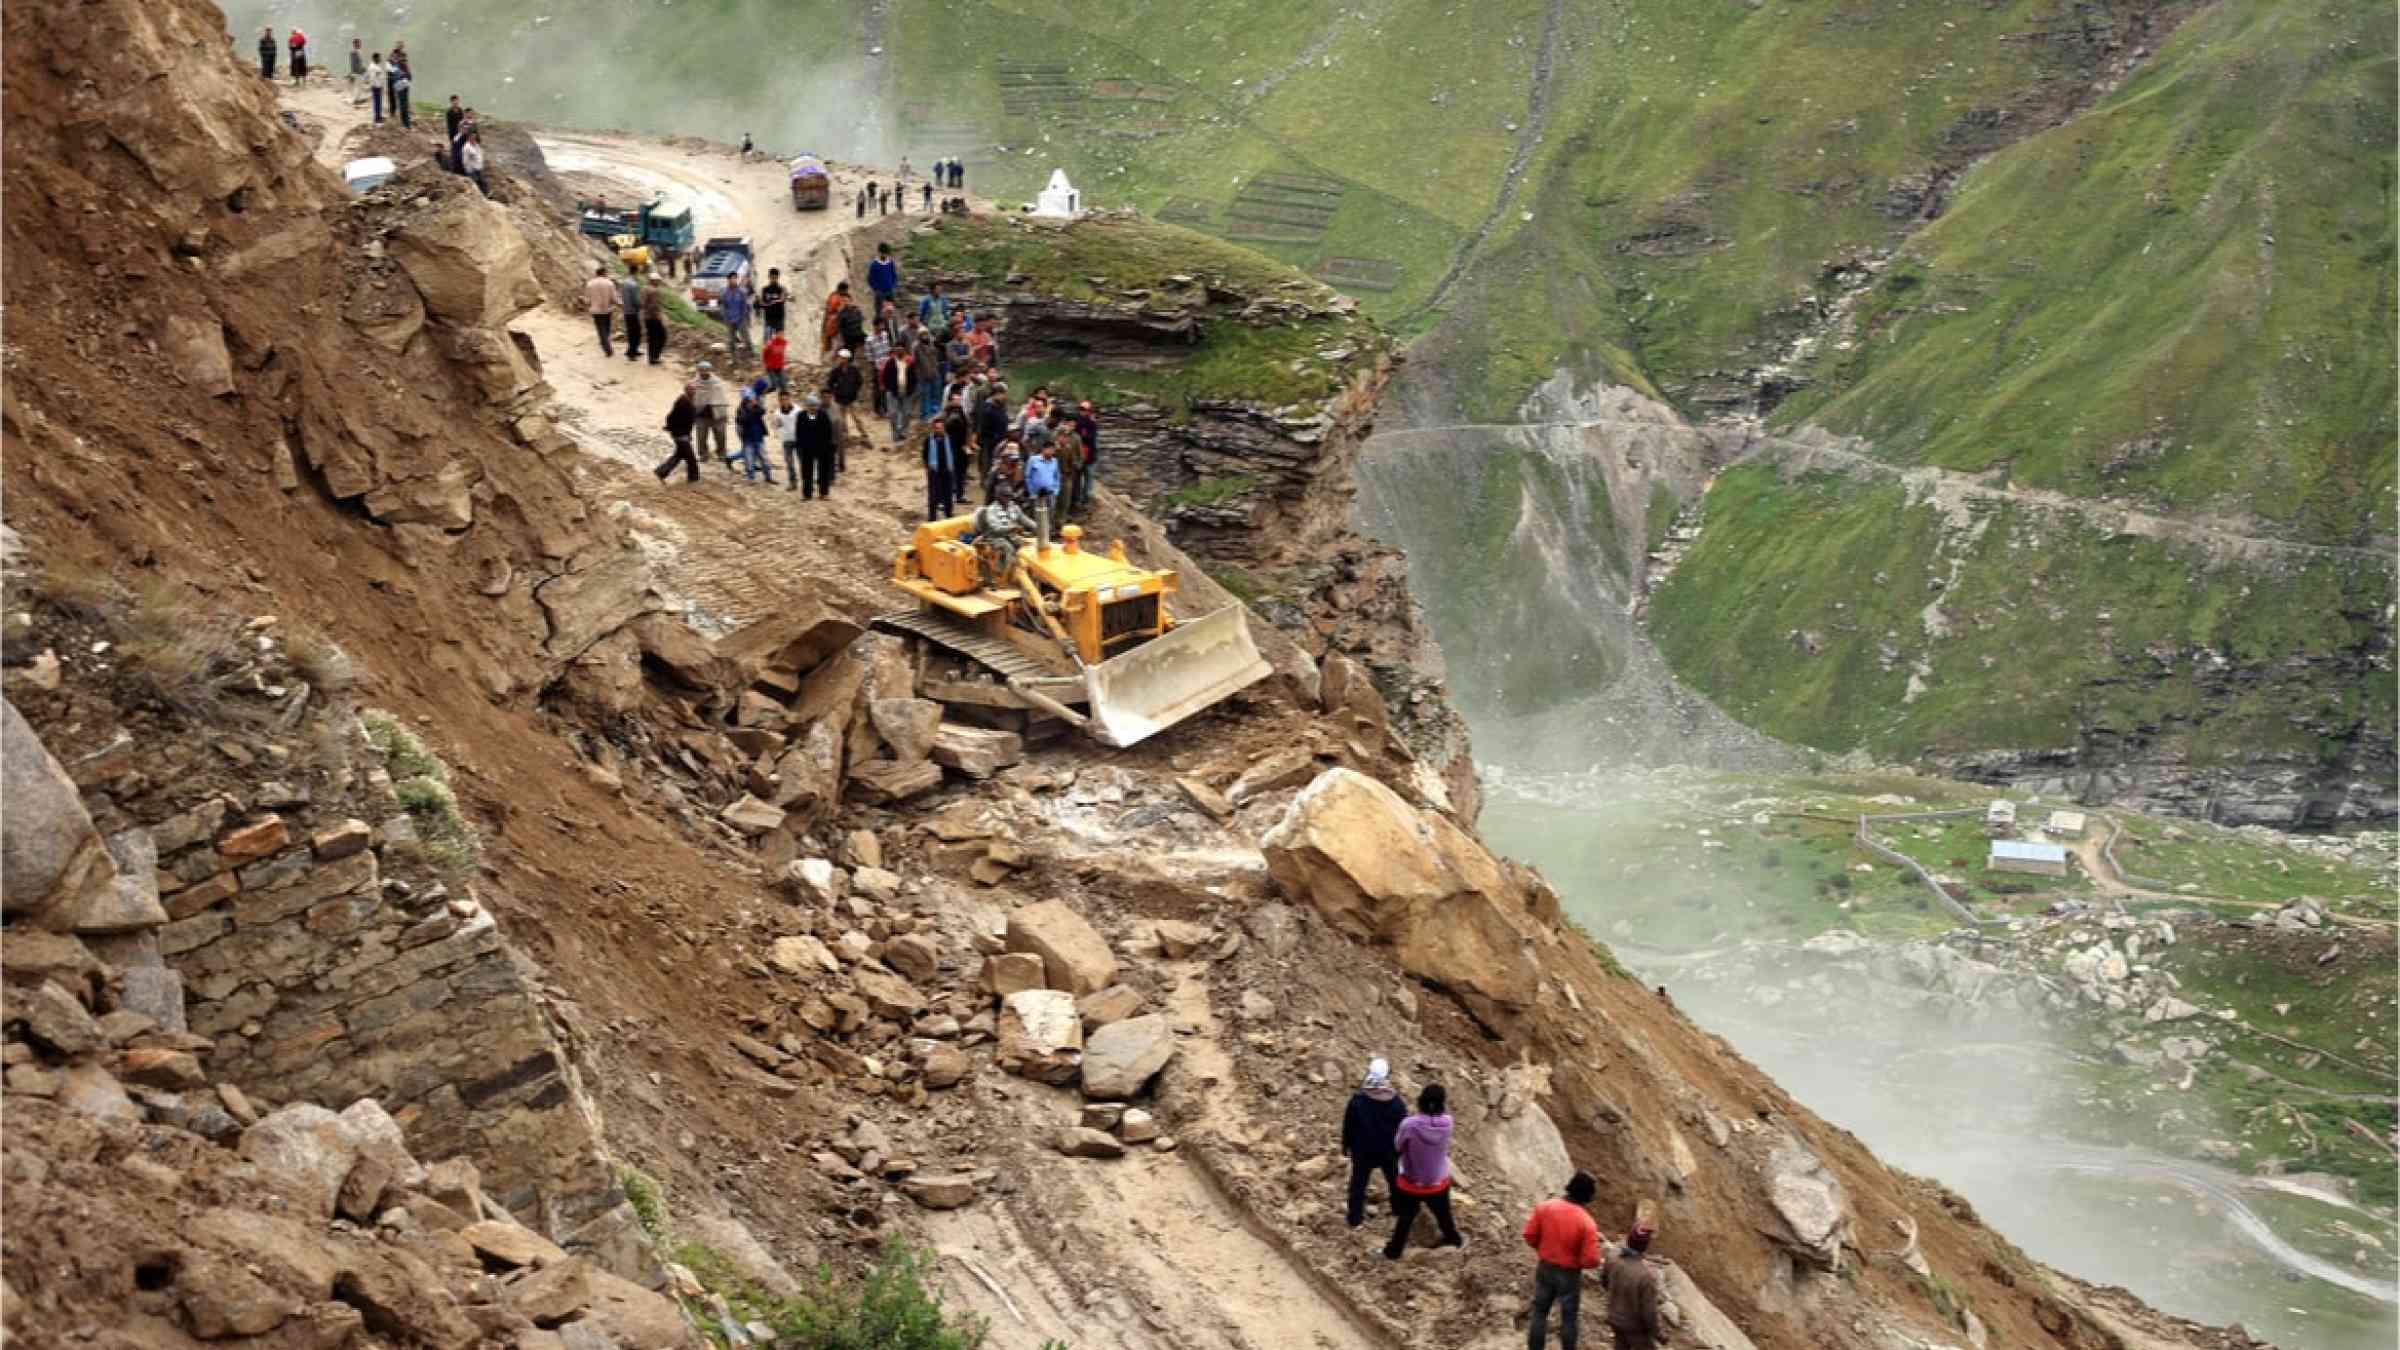 Border Roads Organization clear the road to Leh affected by landslide on August 29, 2012 in Manali, India. Landslides are regular phenomenon of this high altitude region.